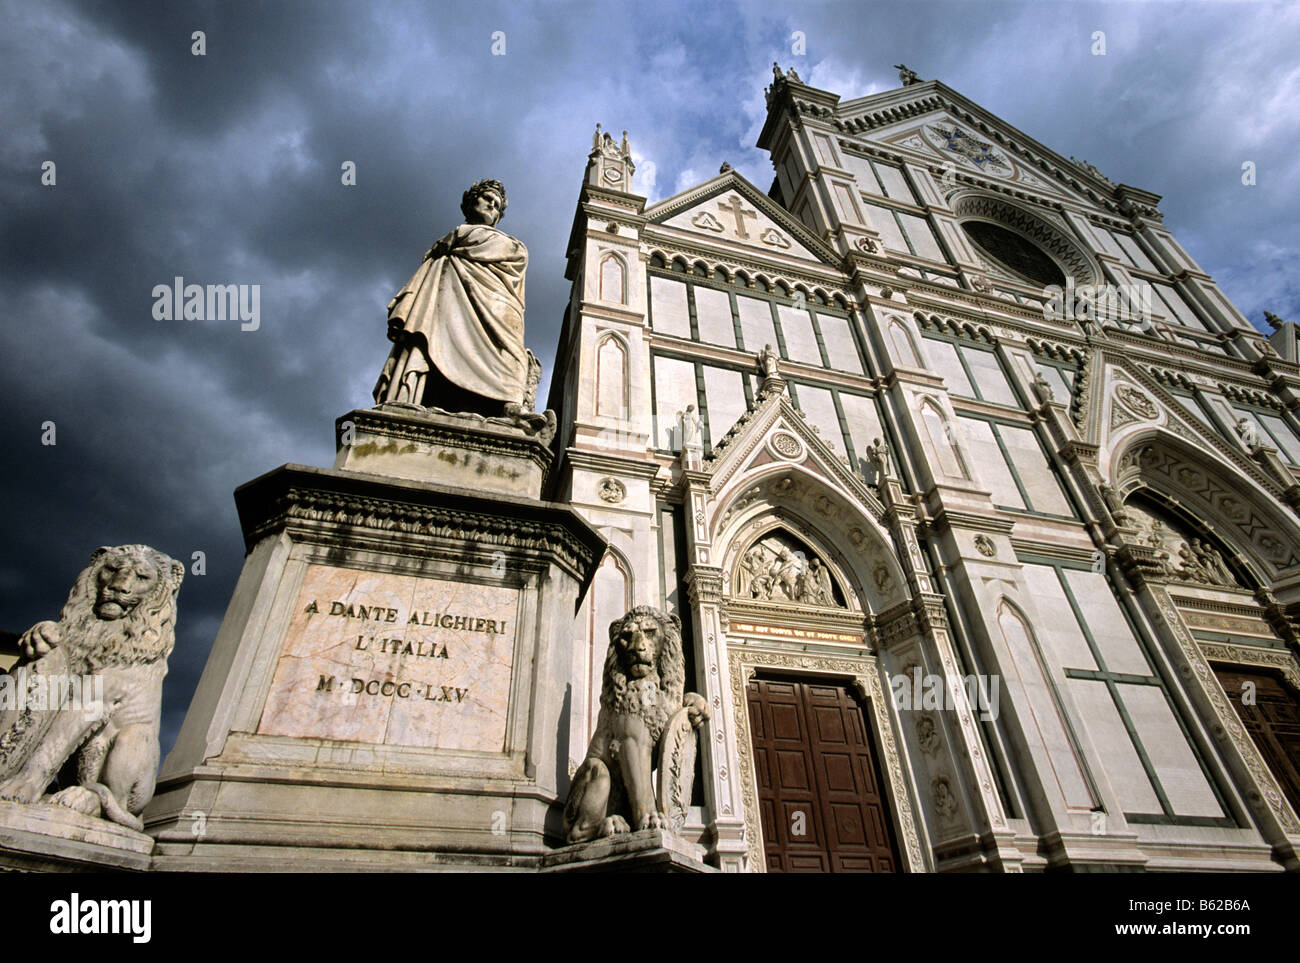 Monument to Dante Alighieri in front of the Sante Croce Basilica, Florence, Firenze, Tuscany, Italy, Europe Stock Photo